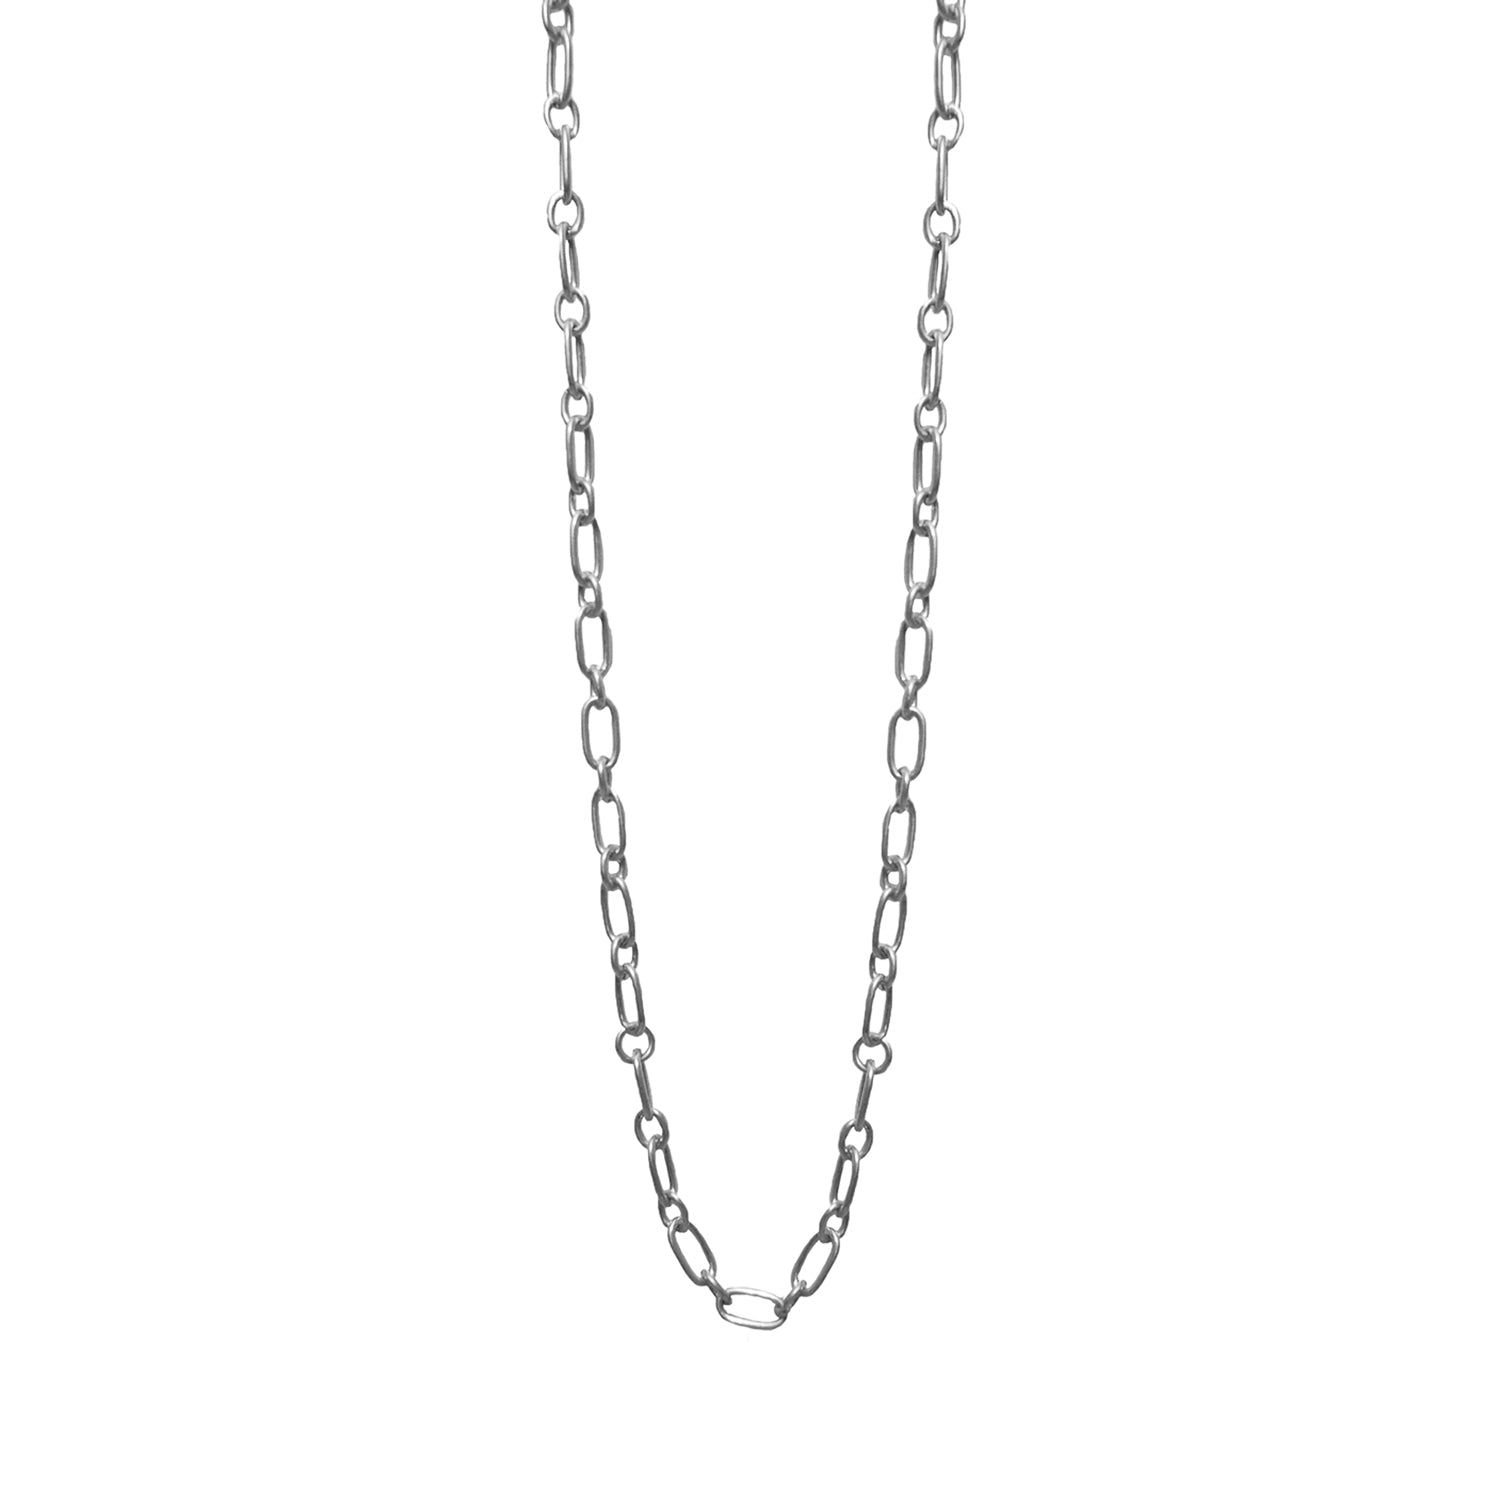 36" small oval link necklace for clasp charms